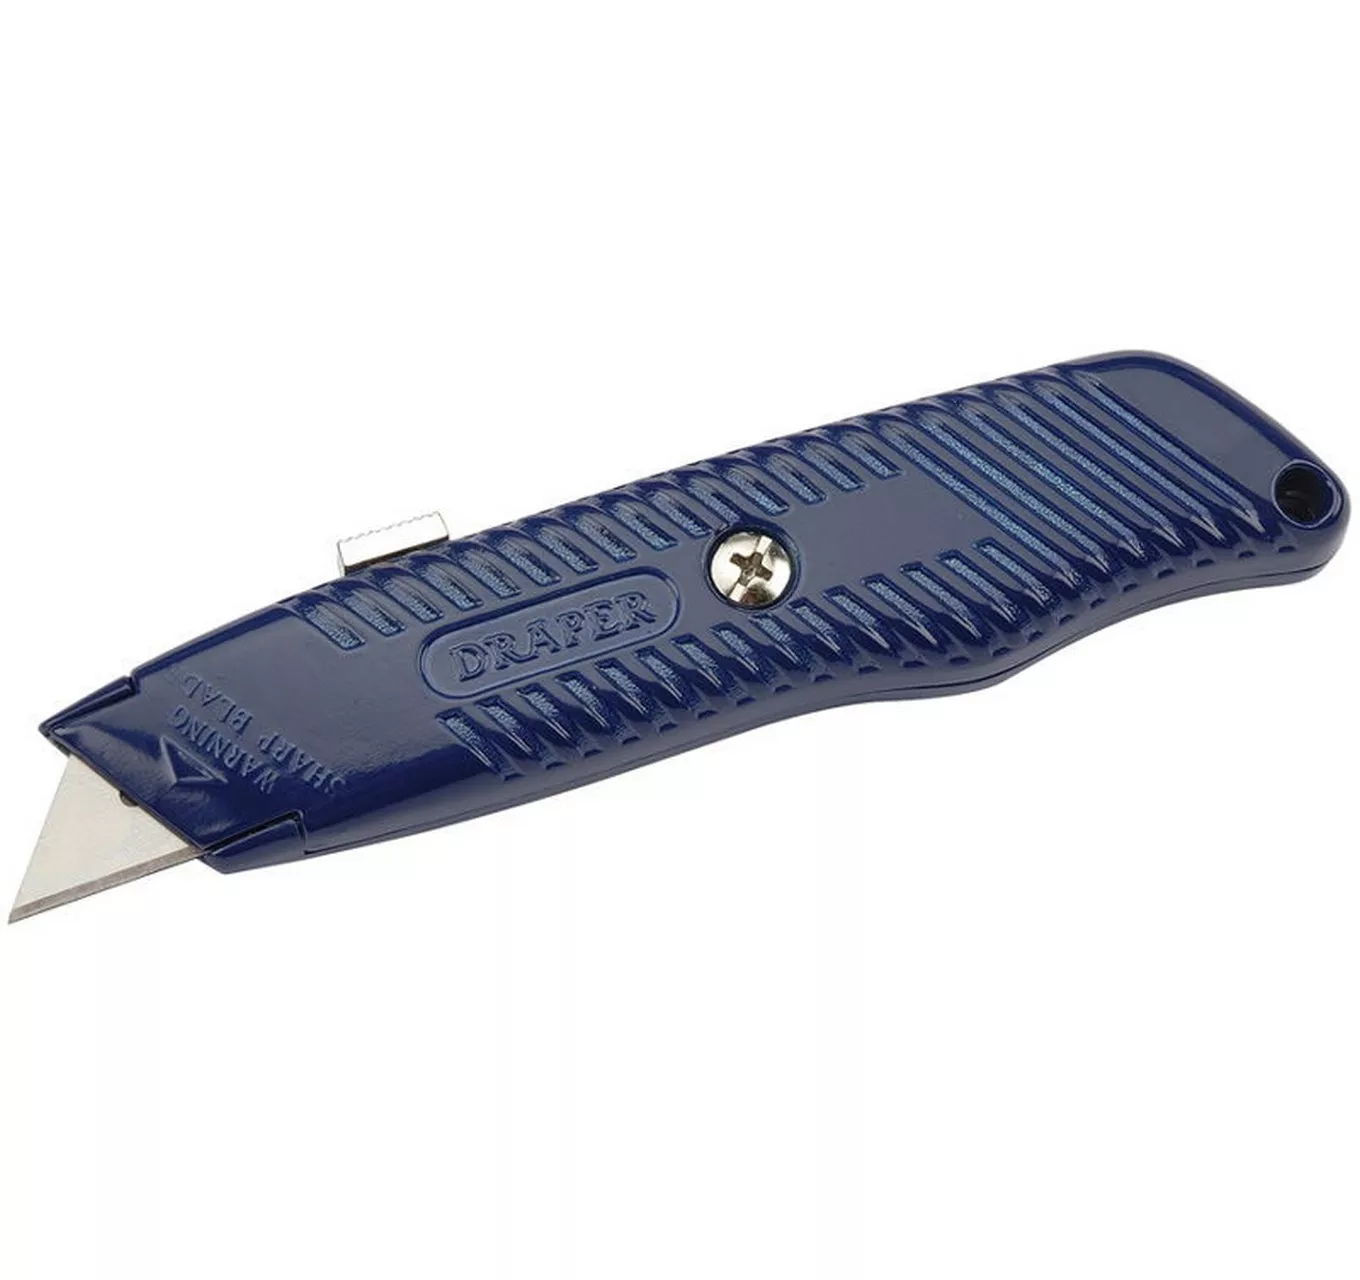 Retractable Trimming Knife